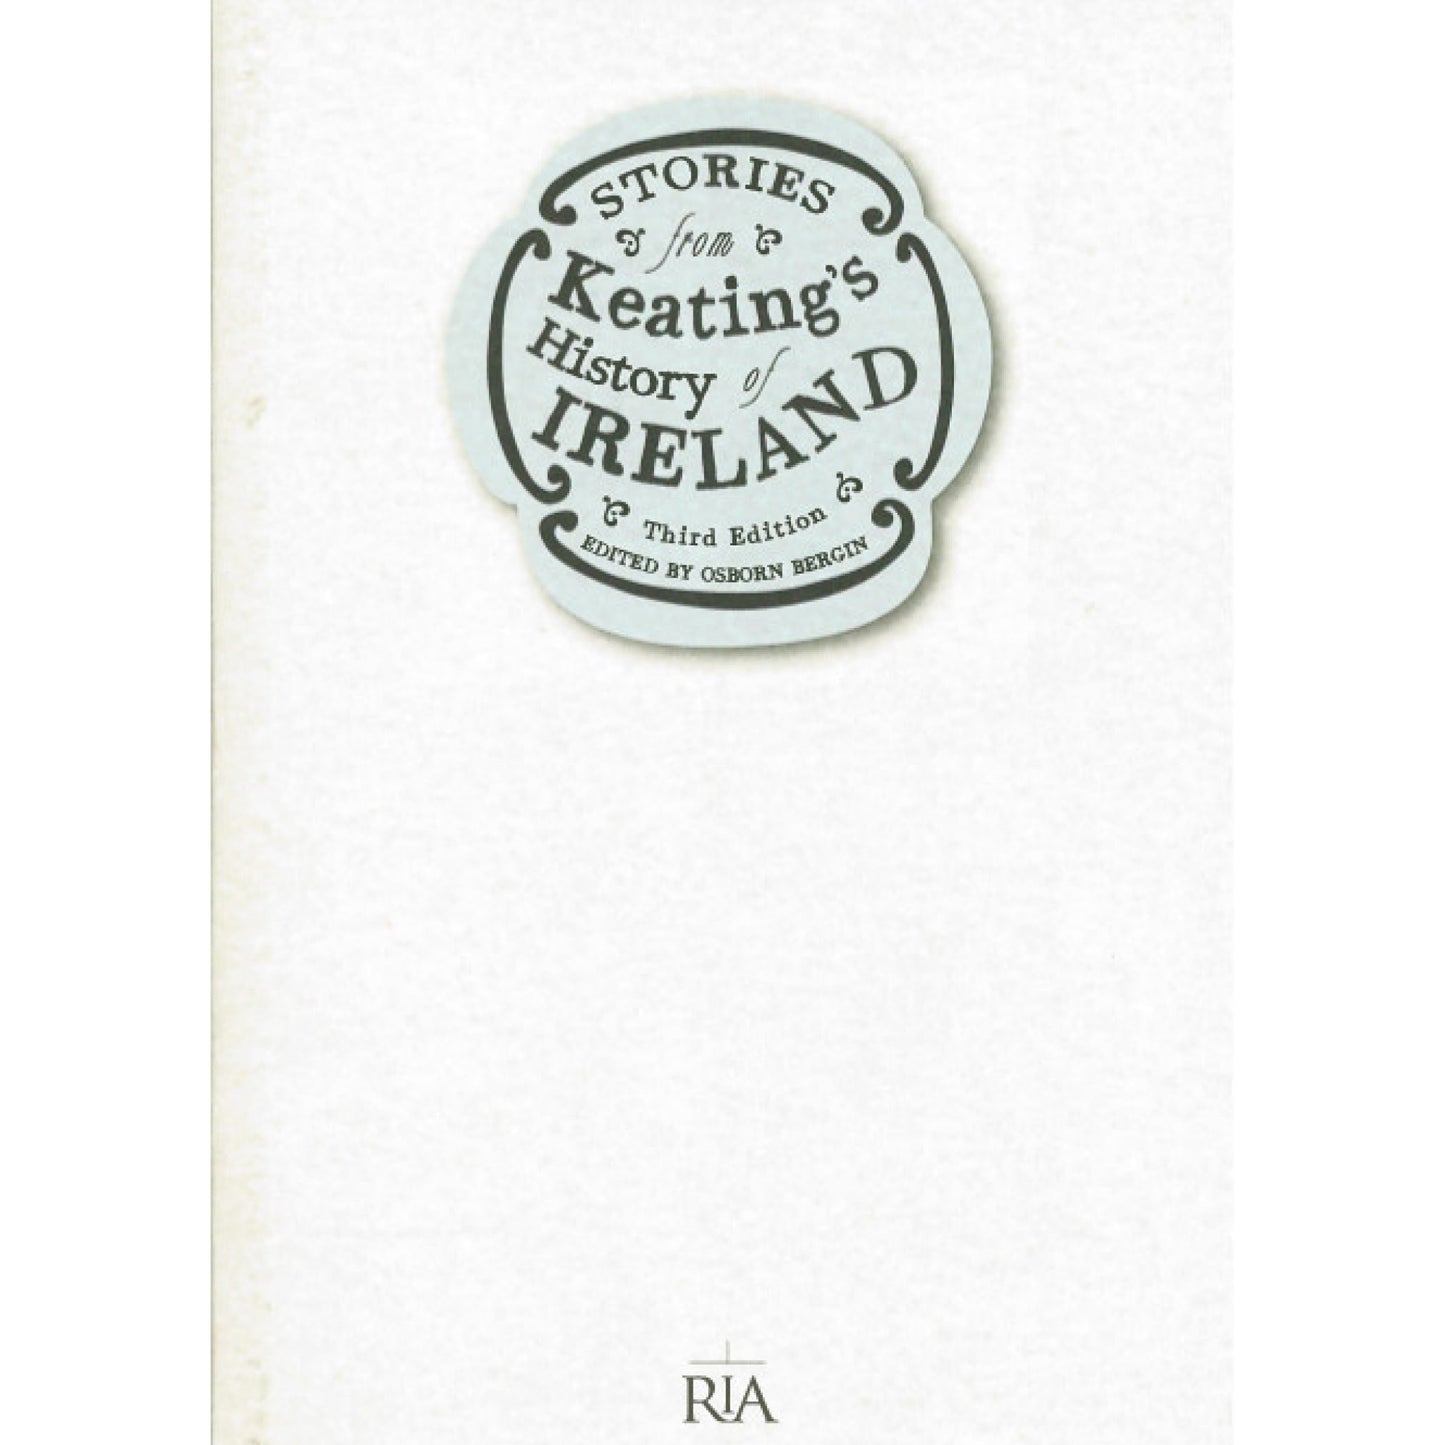 stories from keatings history of ireland cover